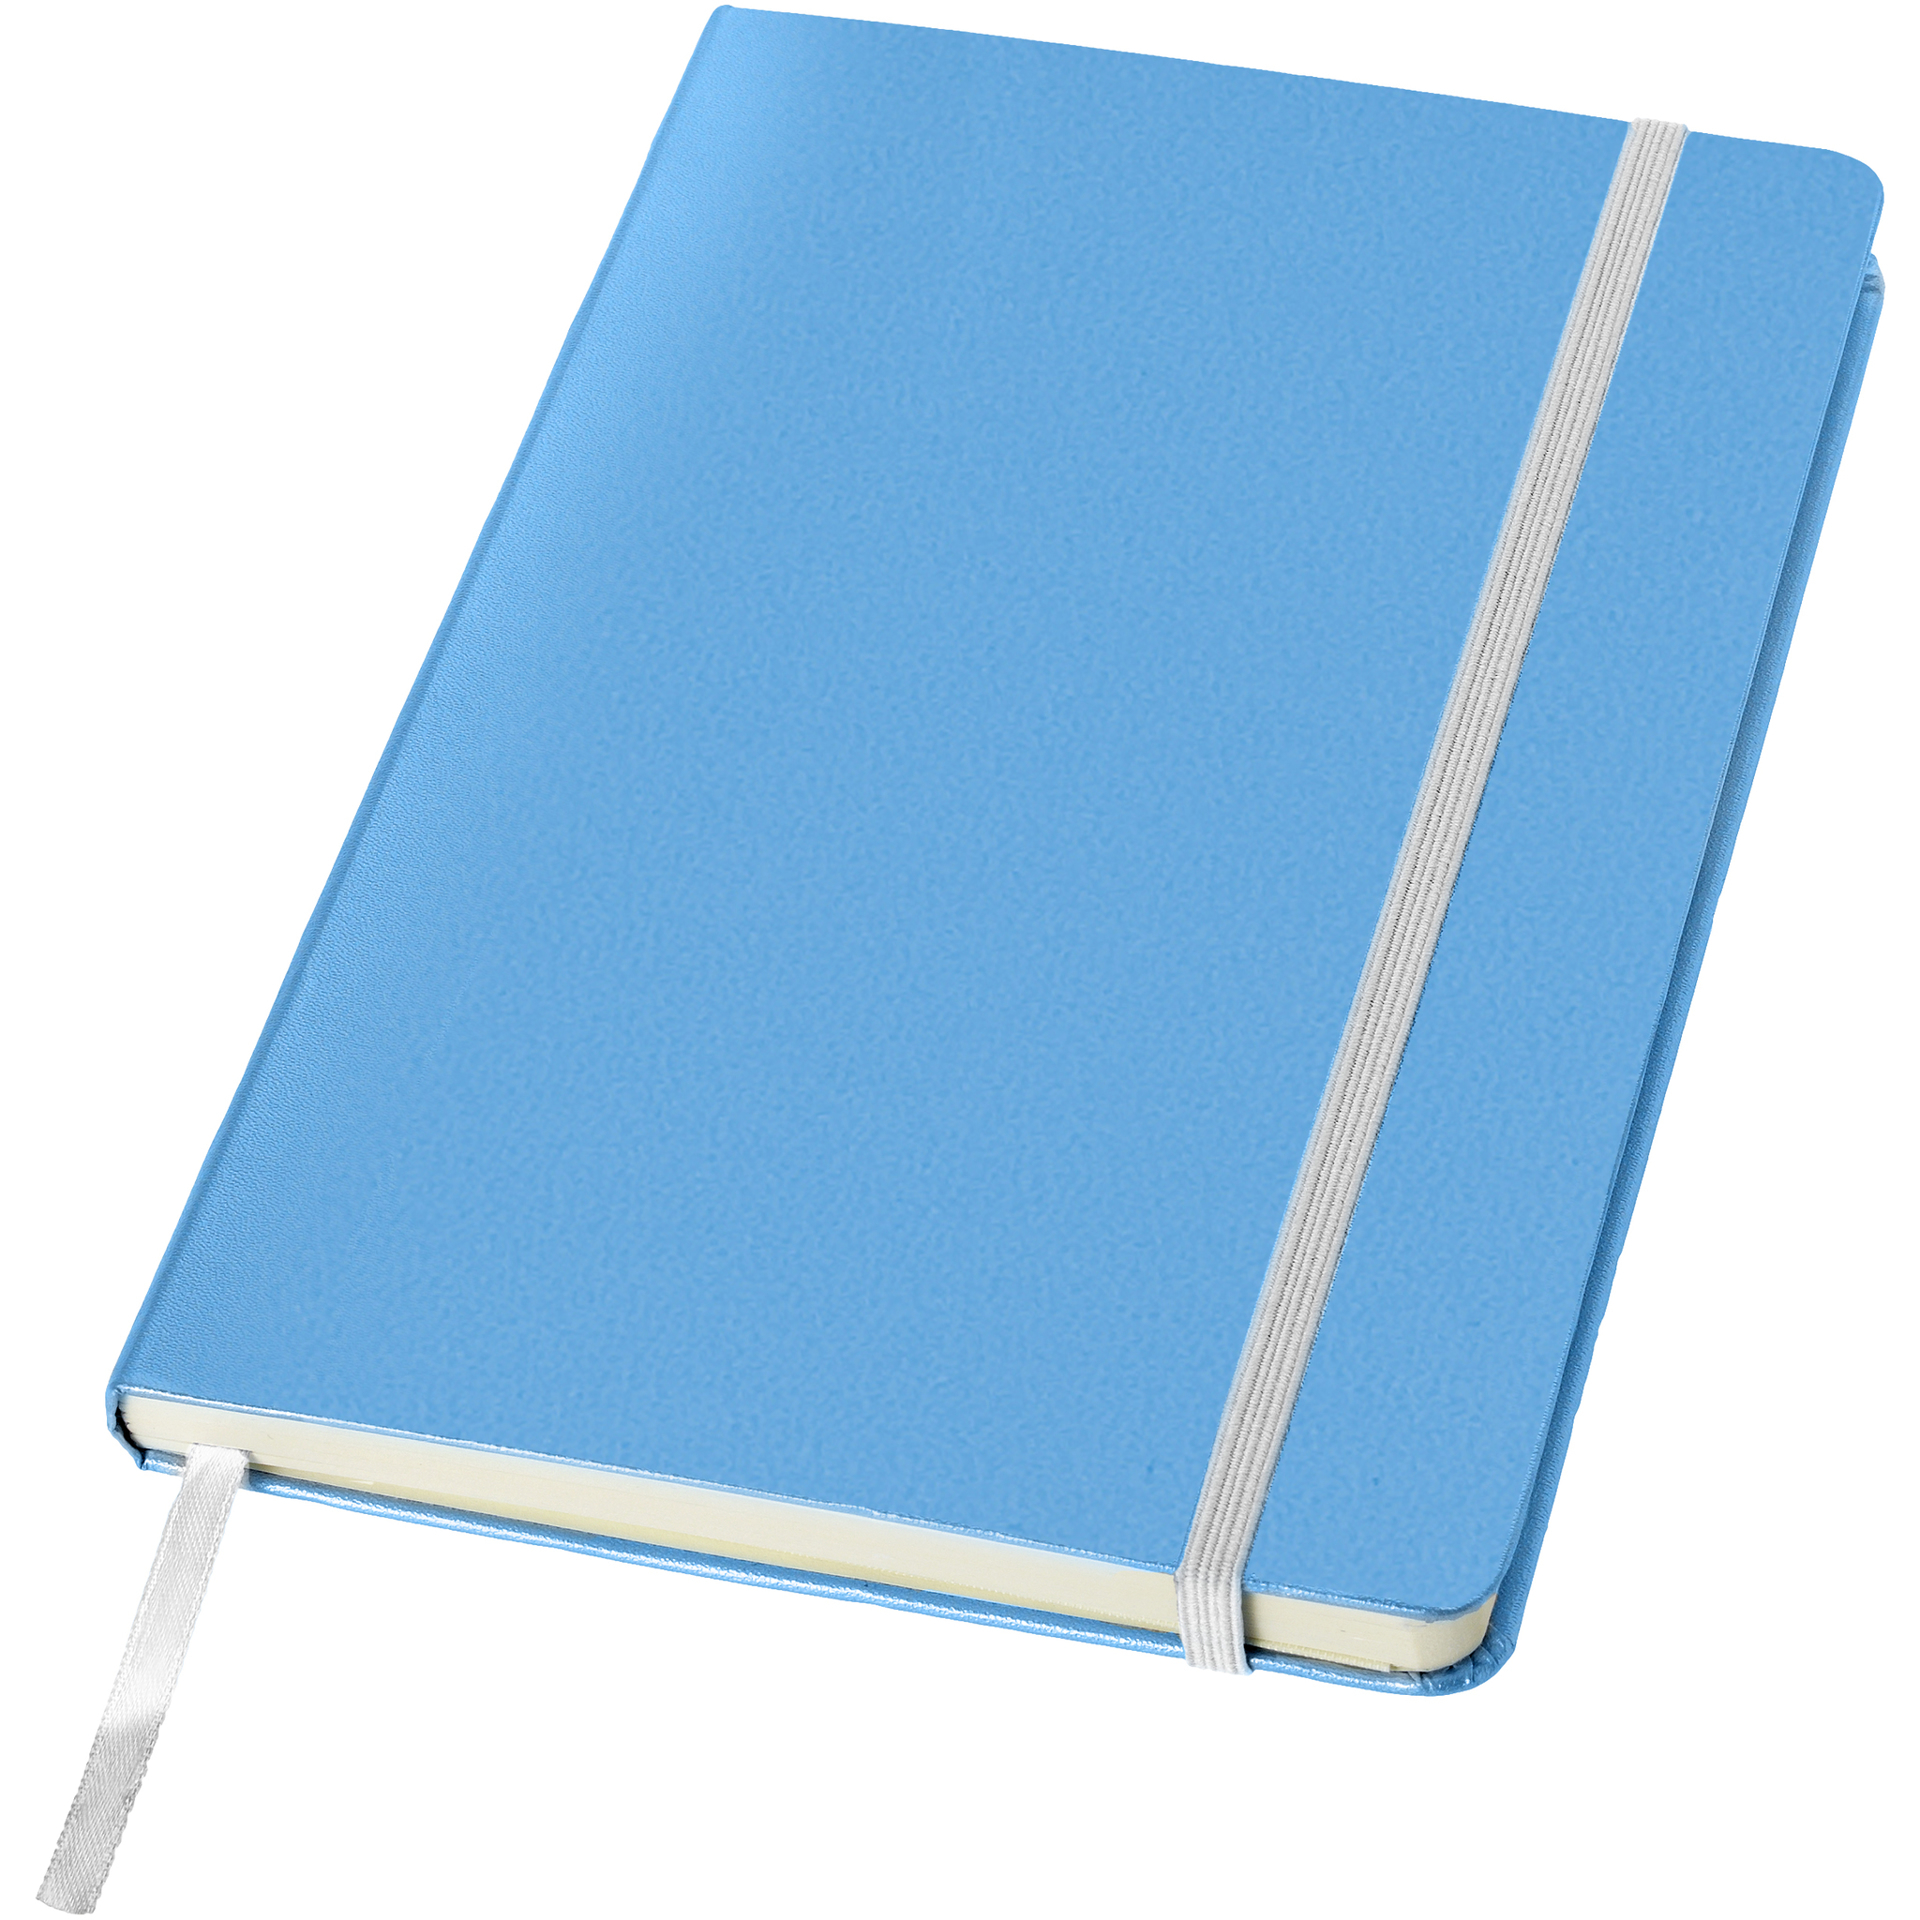 A5 hard cover notebook in blue with grey elastic closure